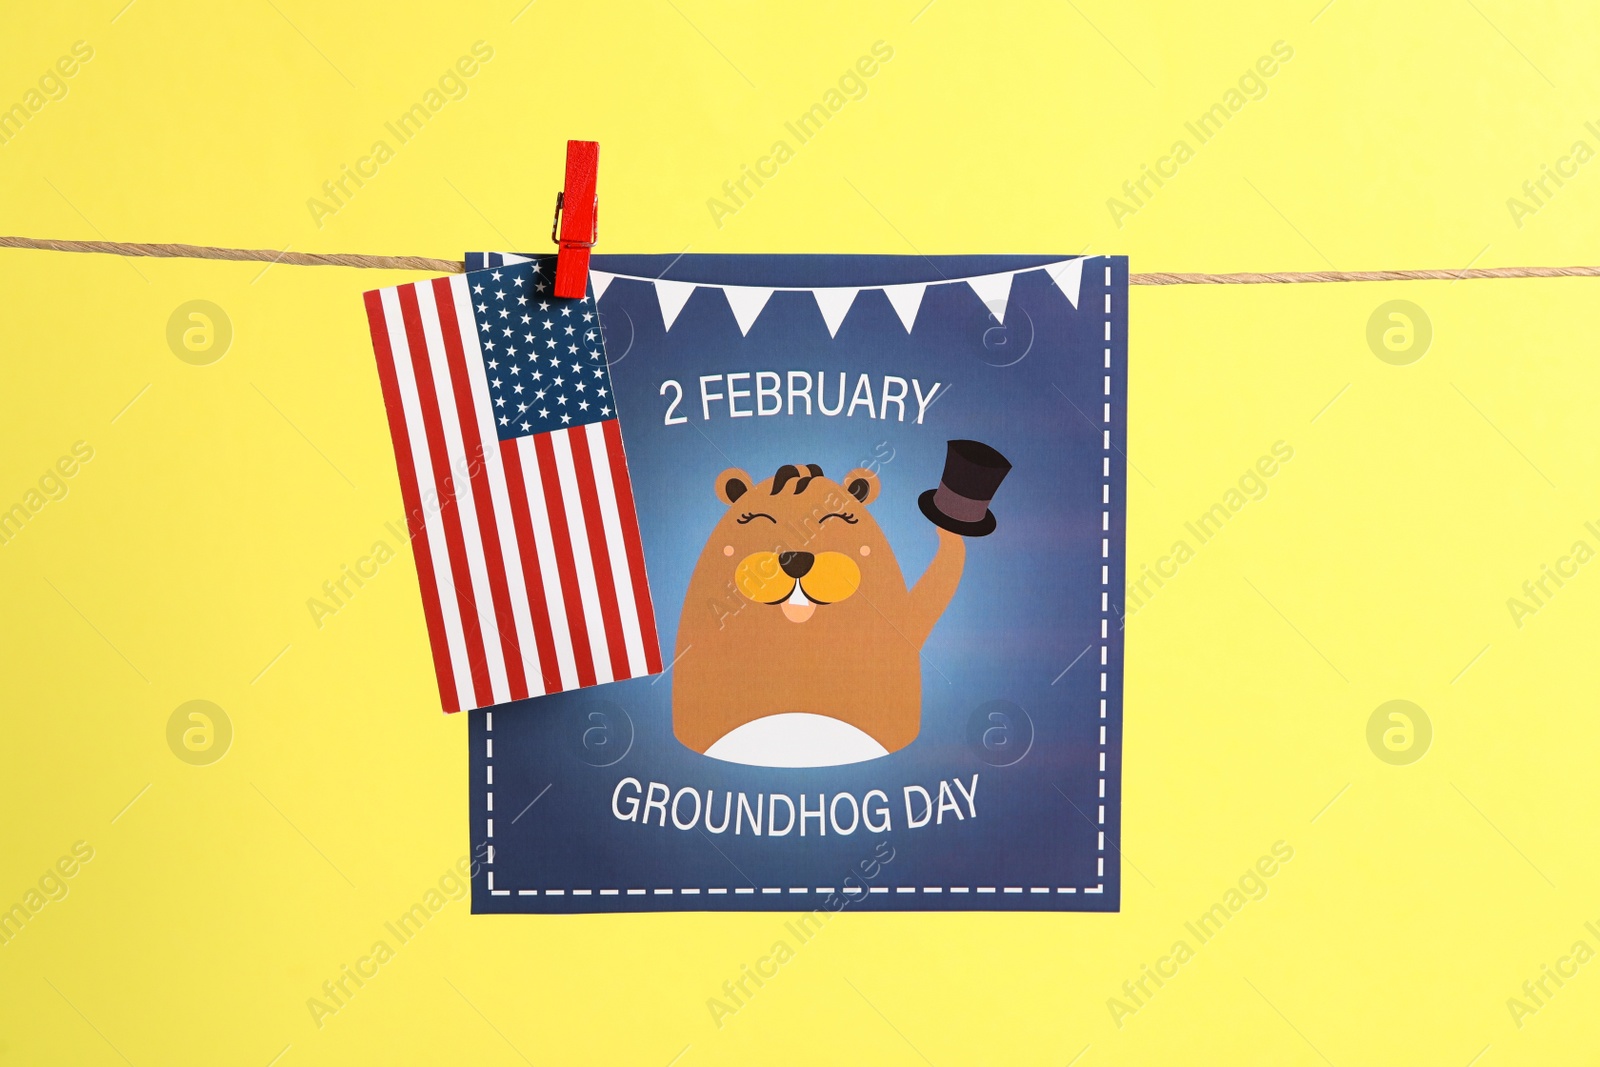 Photo of Happy Groundhog Day greeting card and American flag hanging on yellow background